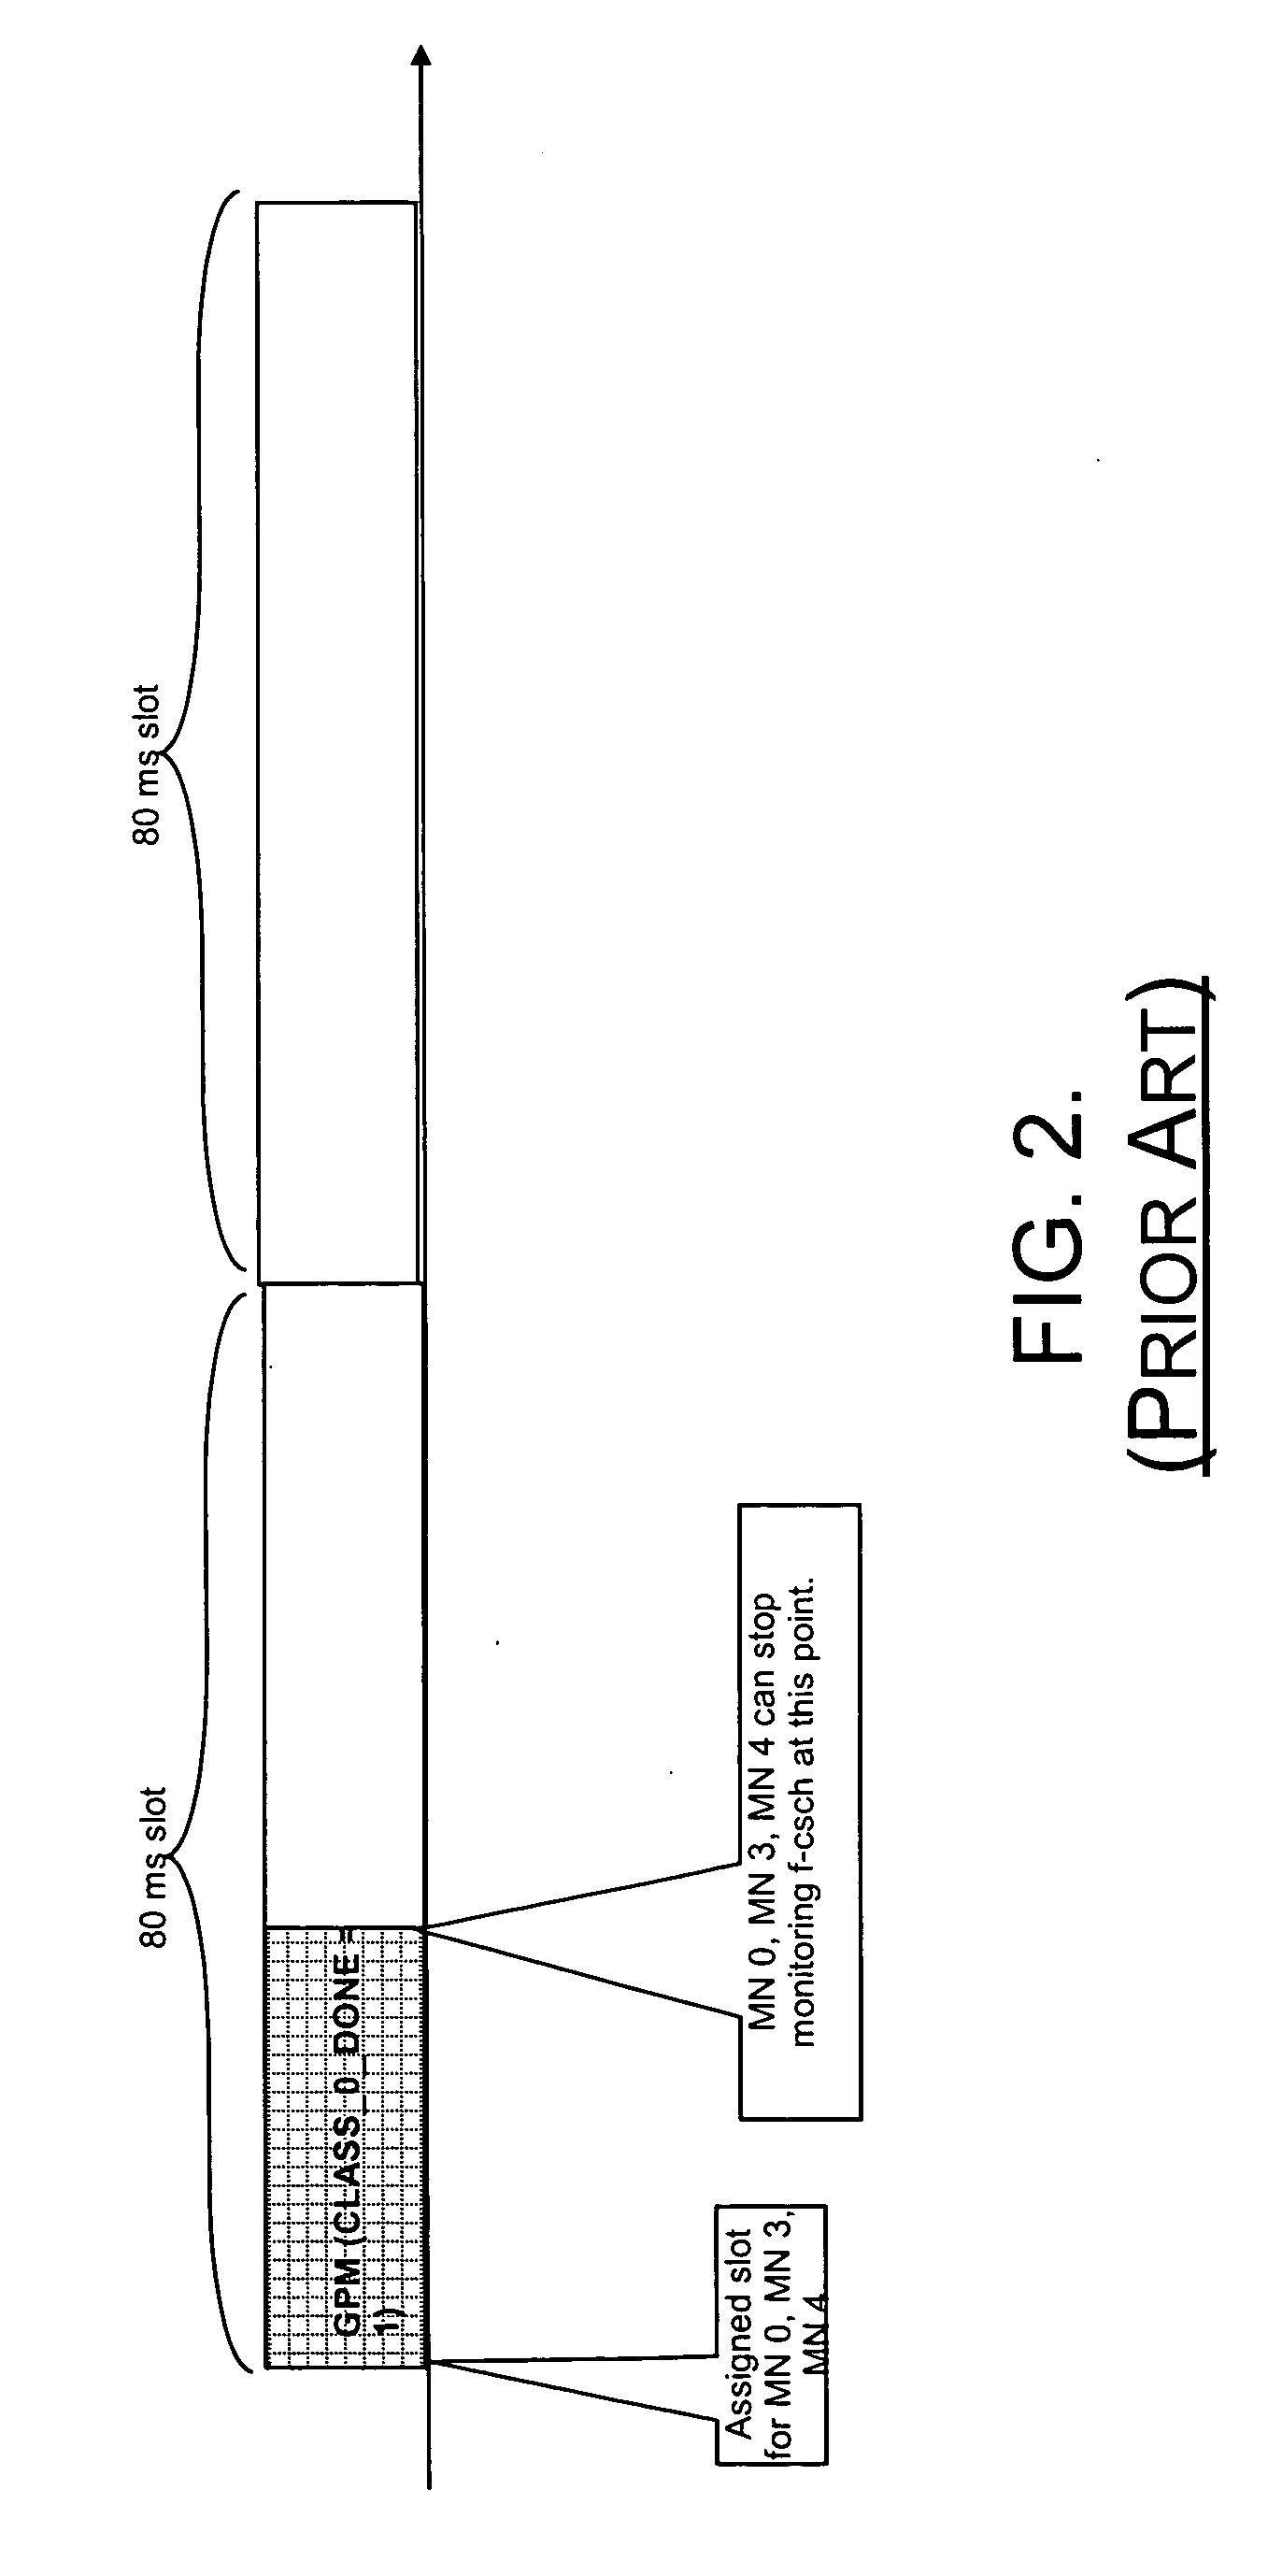 System, network, mobile terminal, computer program product and method for cross-paging a mobile terminal via a data burst message